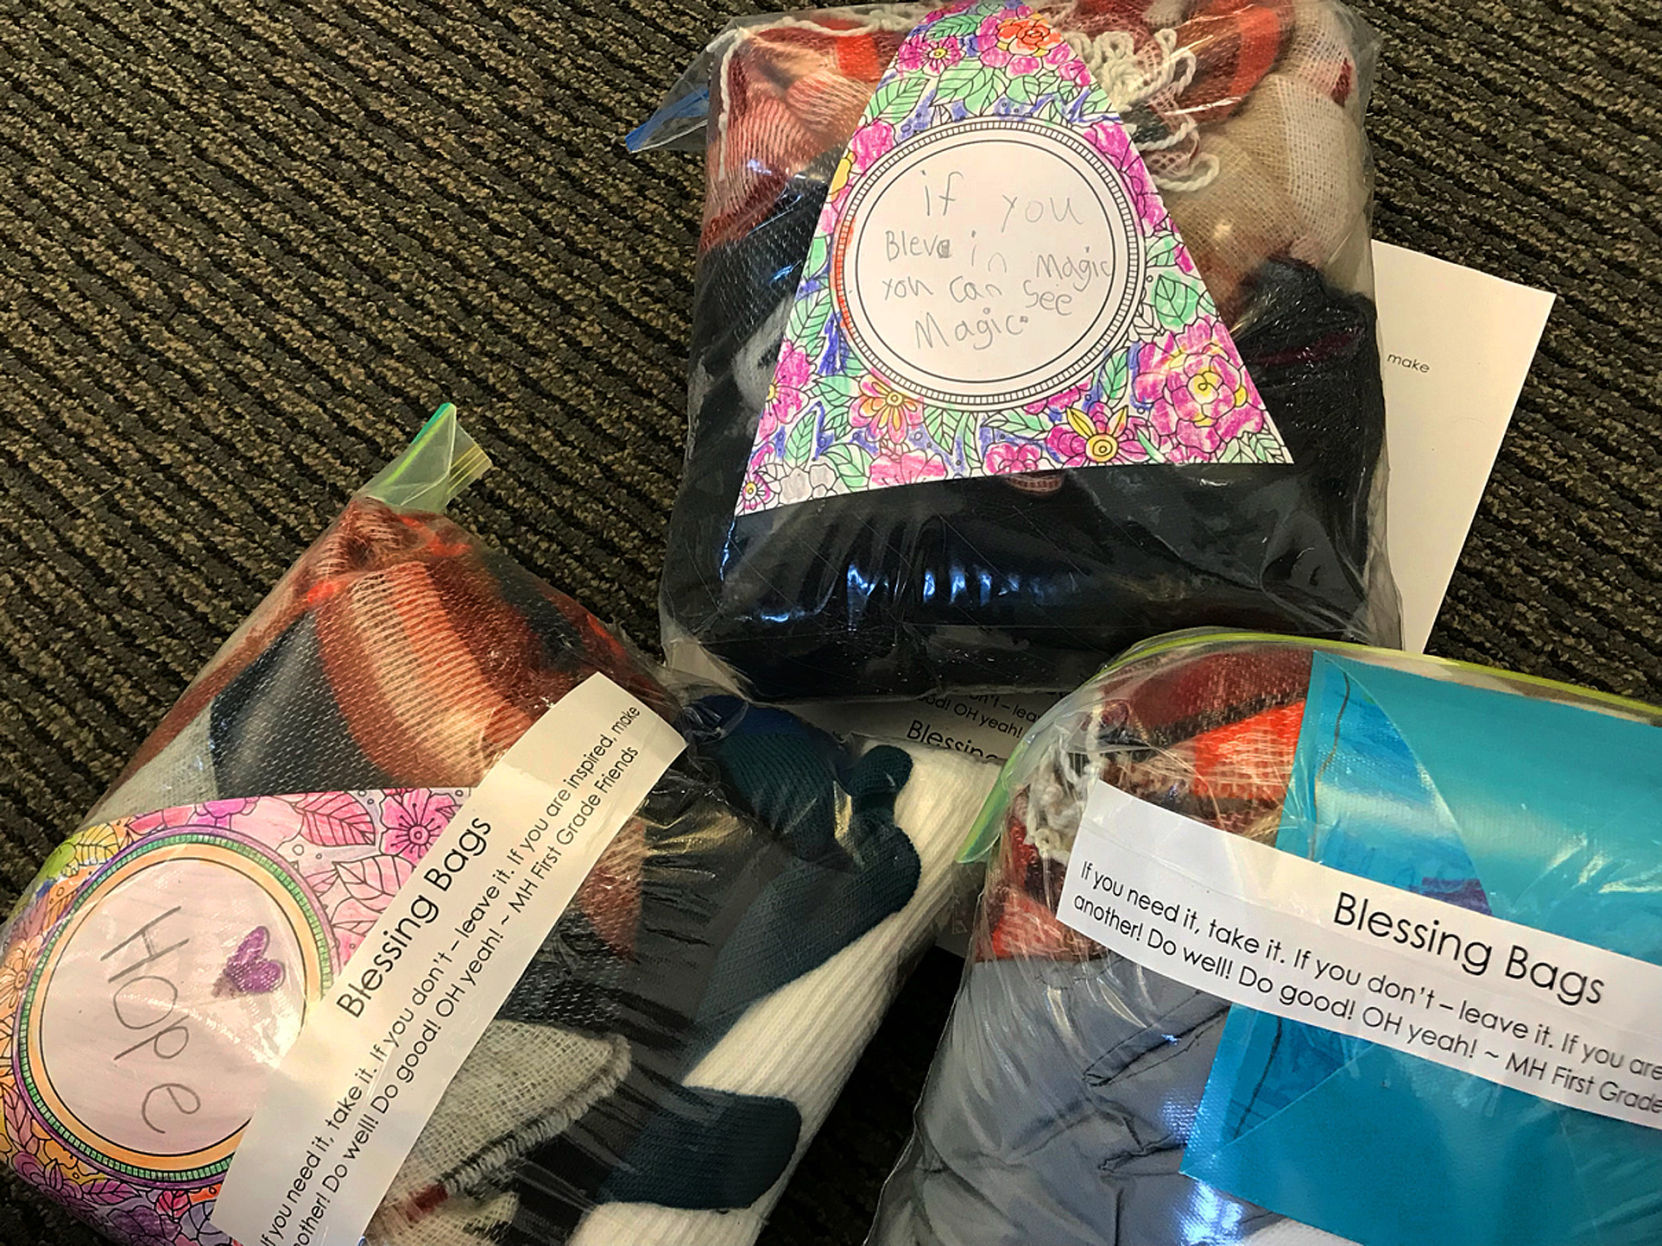 The Blessing Bags Project